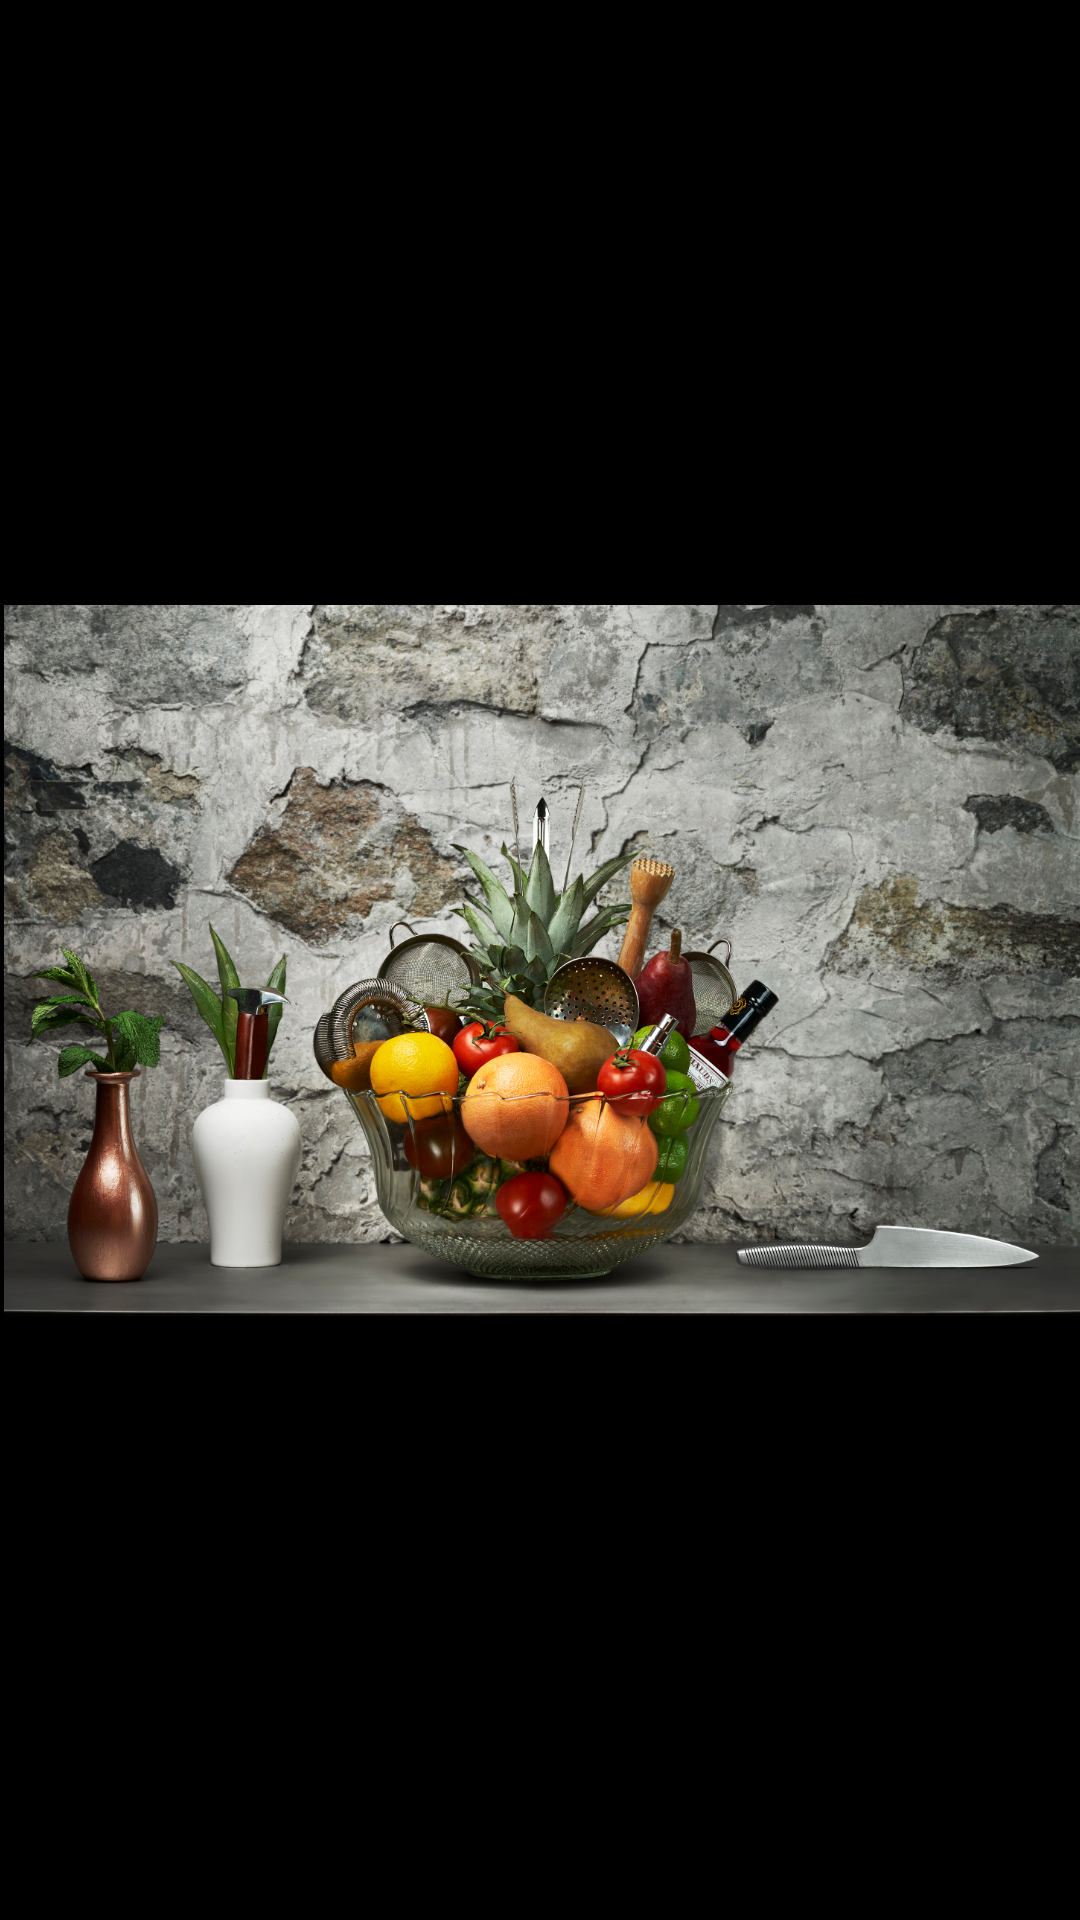 A glass bowl of fruit in front of a concrete wall.